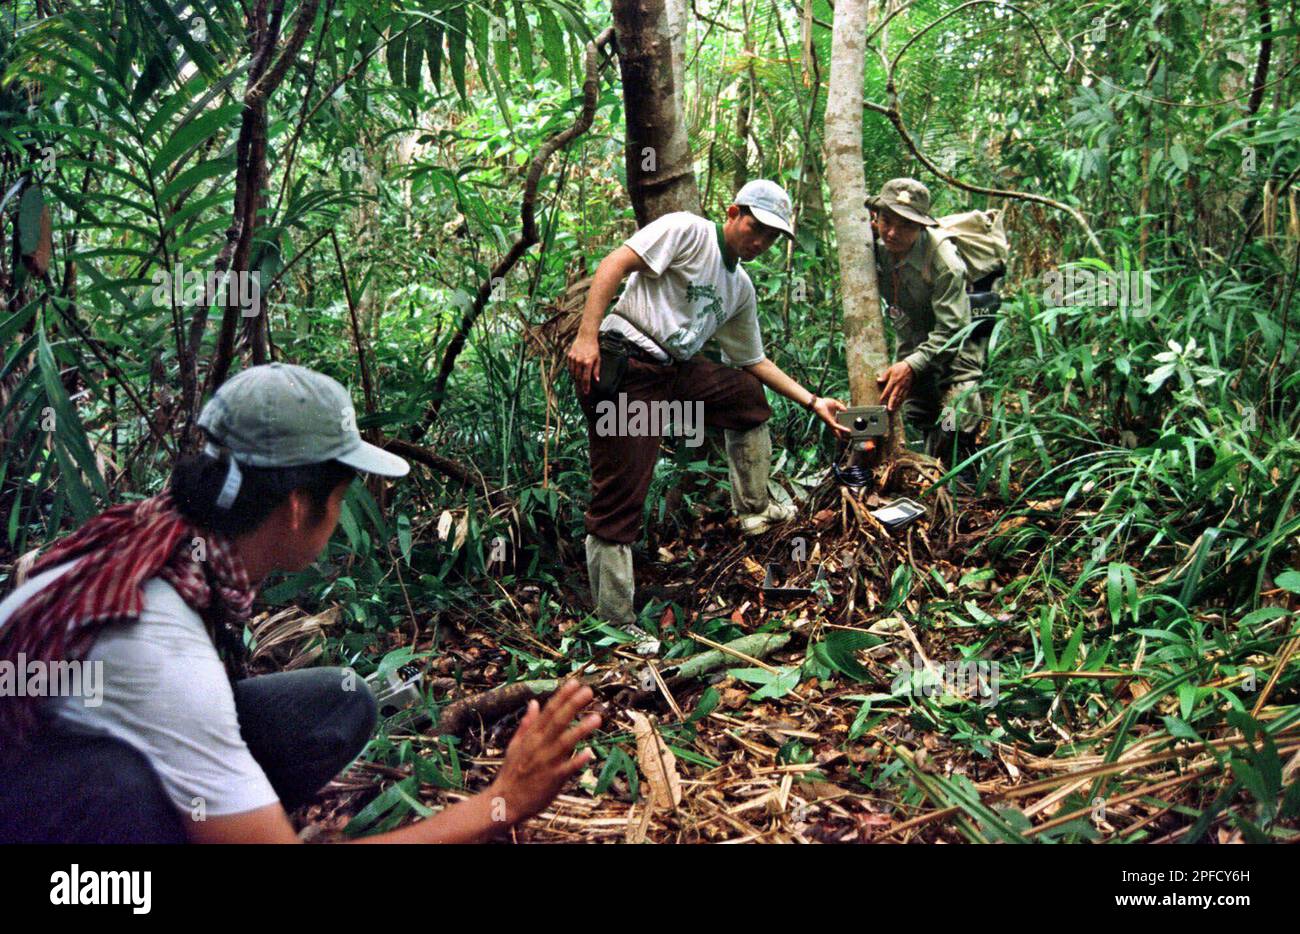 Cambodian Wildlife Protection Officer Keo Omaliss, left, checks the  infrared trigger of a camera trap while it is positioned by fellow rangers  Men Soriyun, center, and Tep Borin, May 26, 1999, in